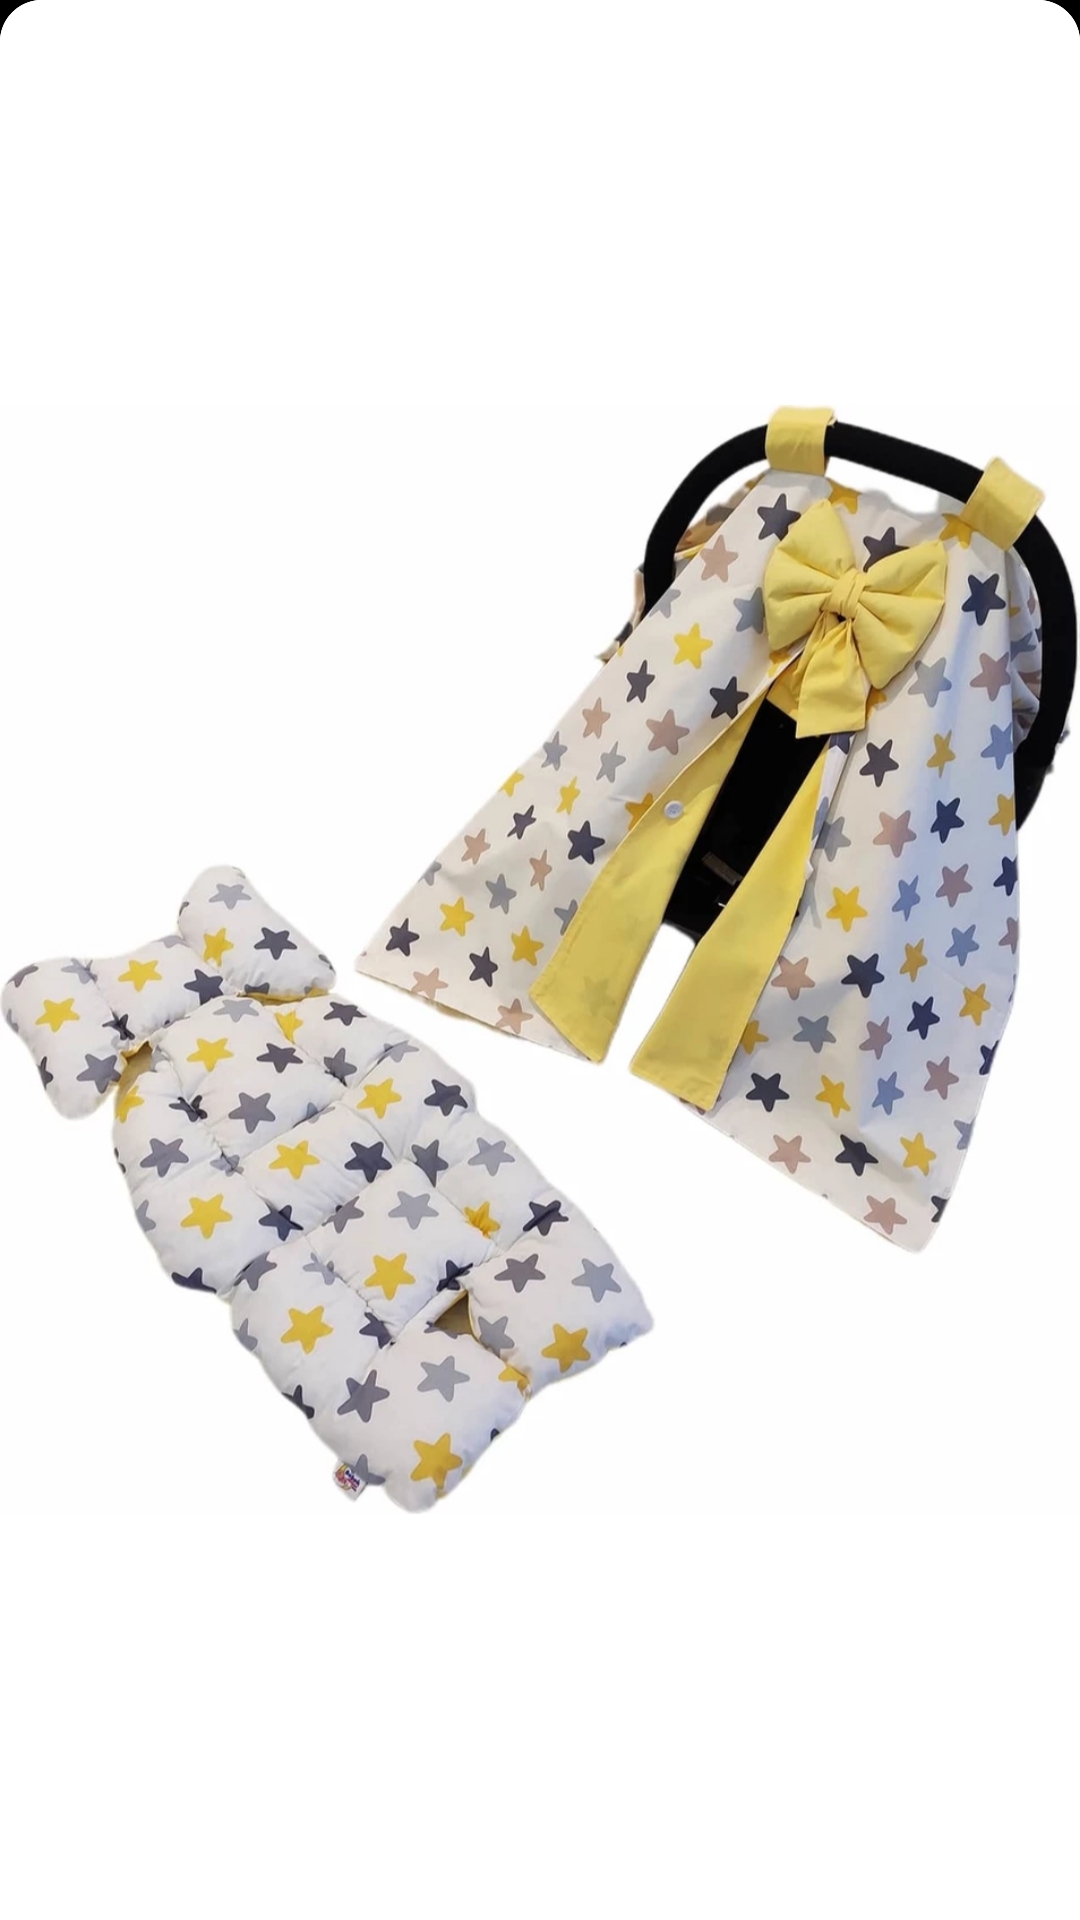 Stroller Cover and Inner Pillow White-Yellow